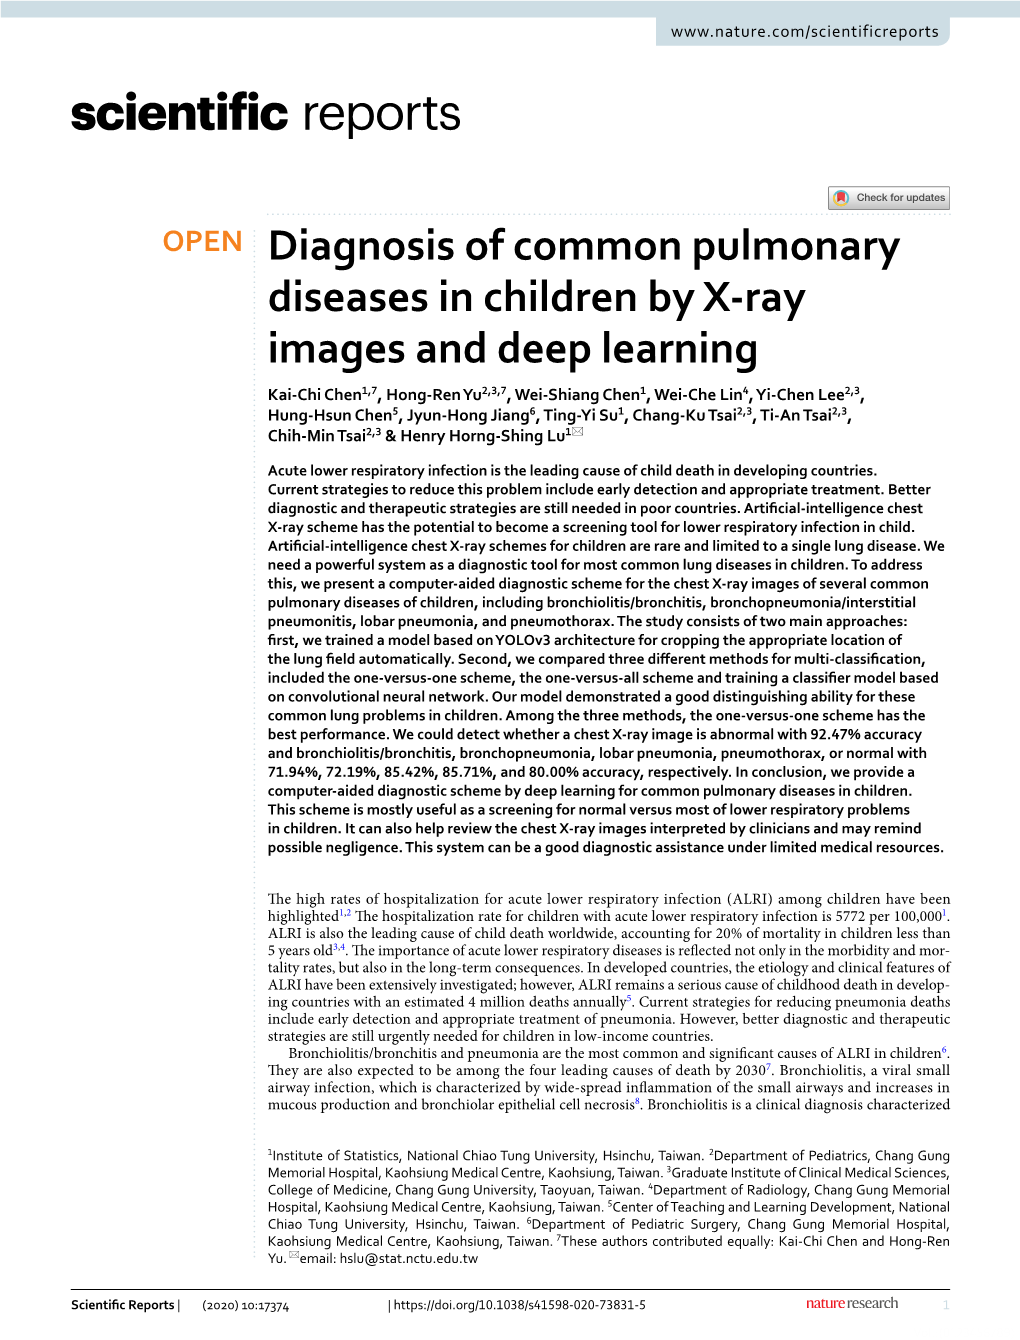 Diagnosis of Common Pulmonary Diseases in Children by X-Ray